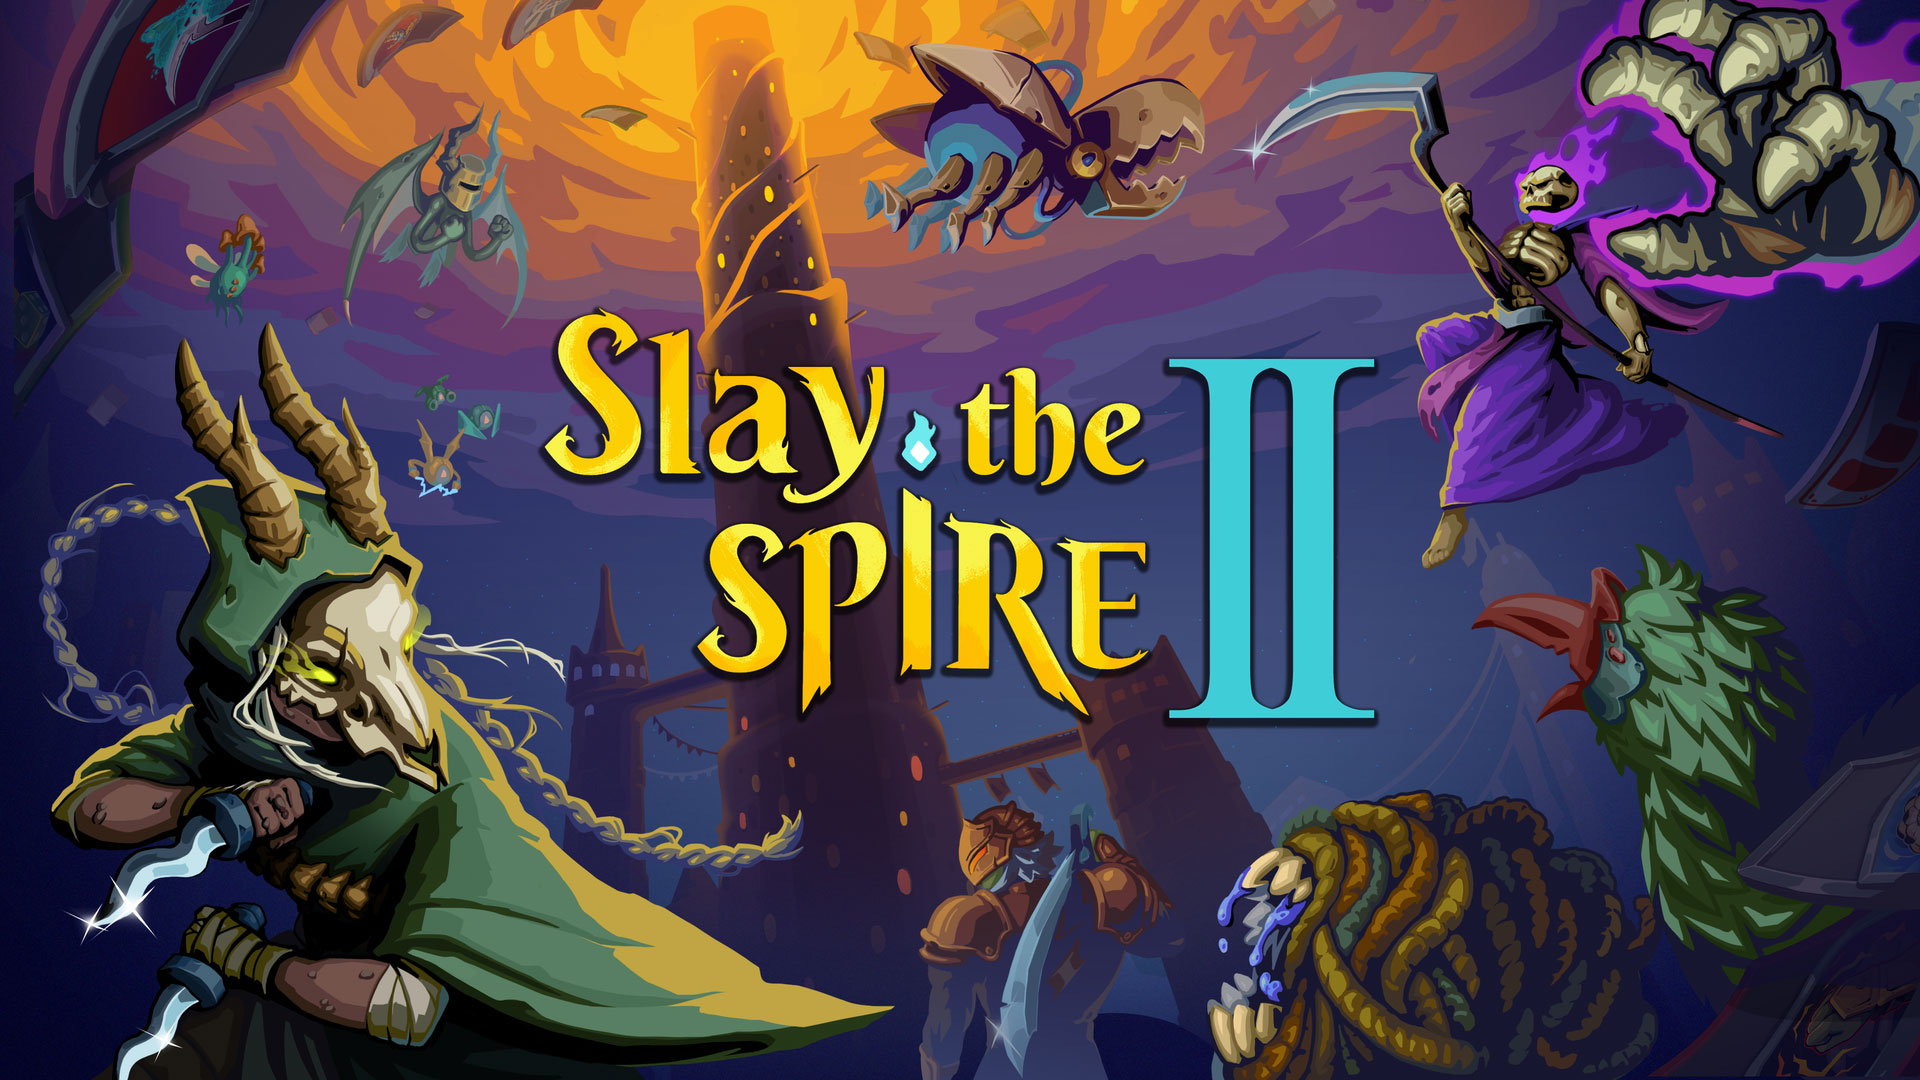 Slay the Spire 2 enters Early Access in 2025